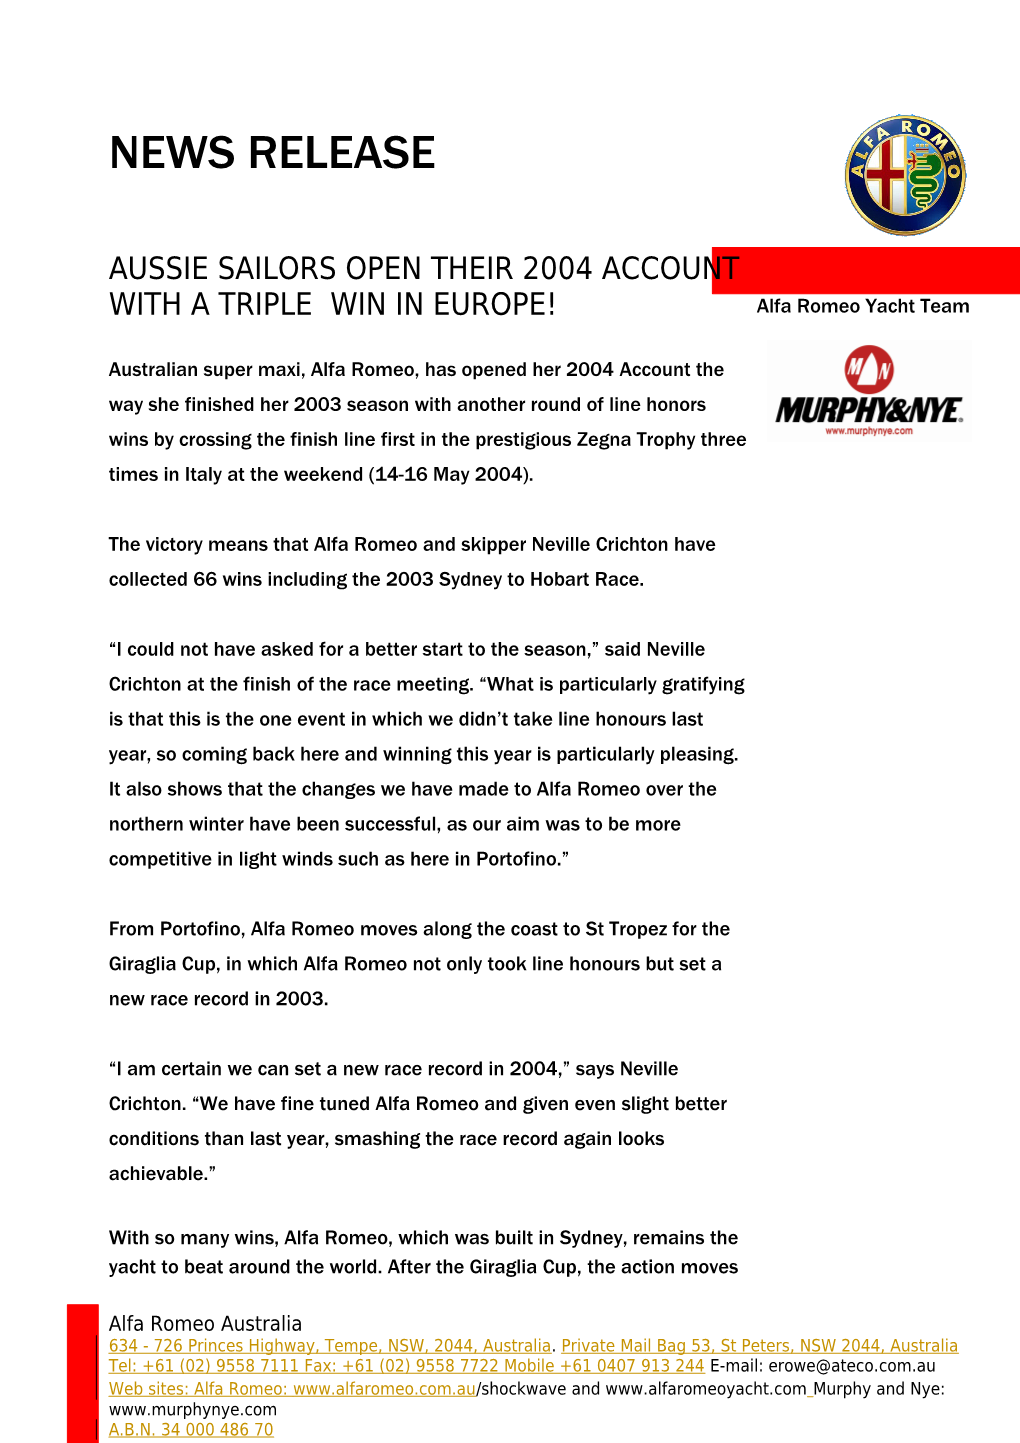 Aussie Sailors Open Their 2004 Account with a Triple Win in Europe!